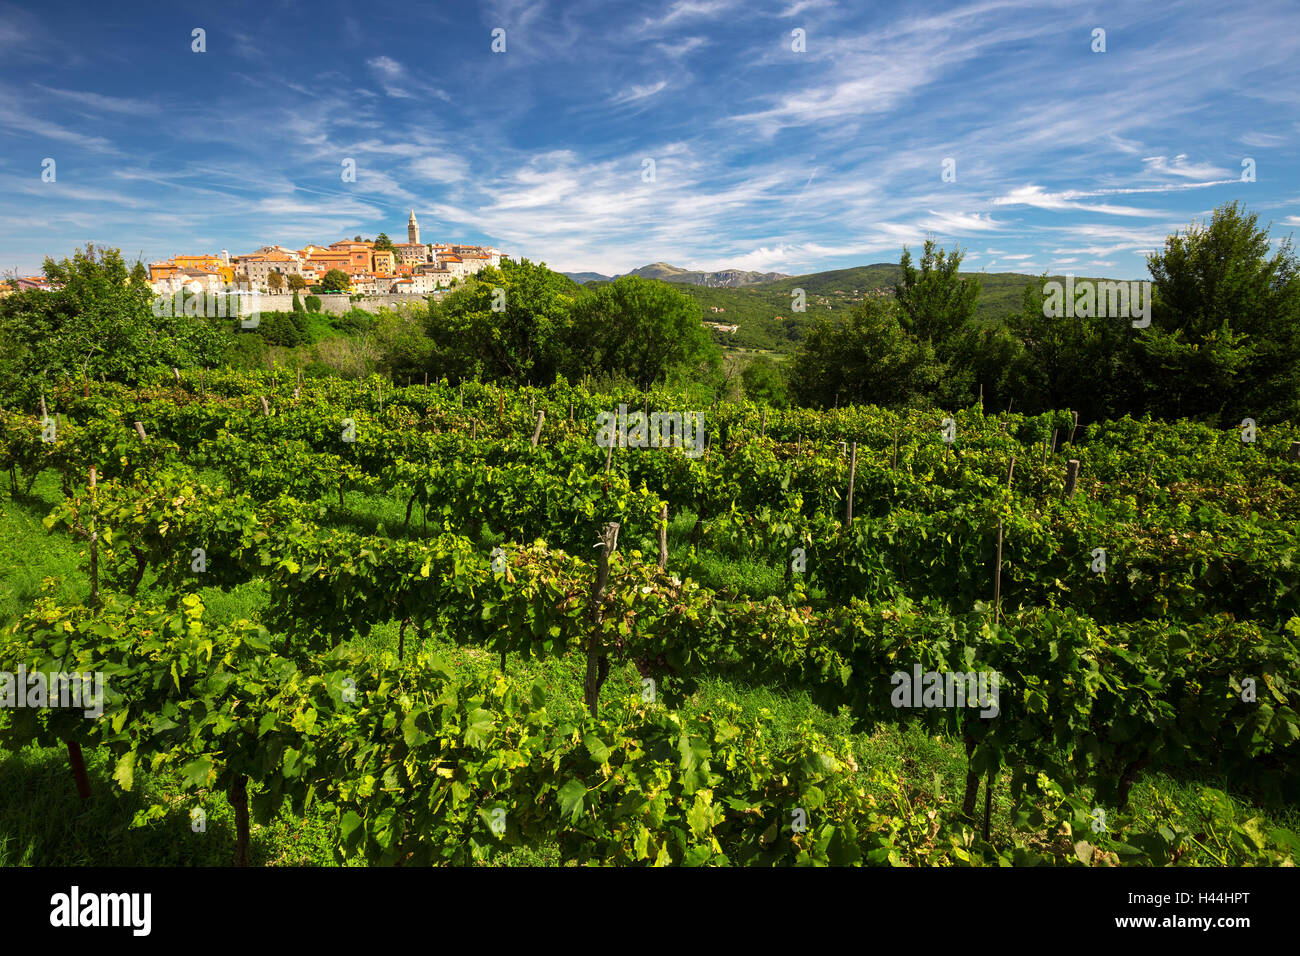 Old village with vineyard, blue sky and mountains in Labin, Istria, Croatia Stock Photo